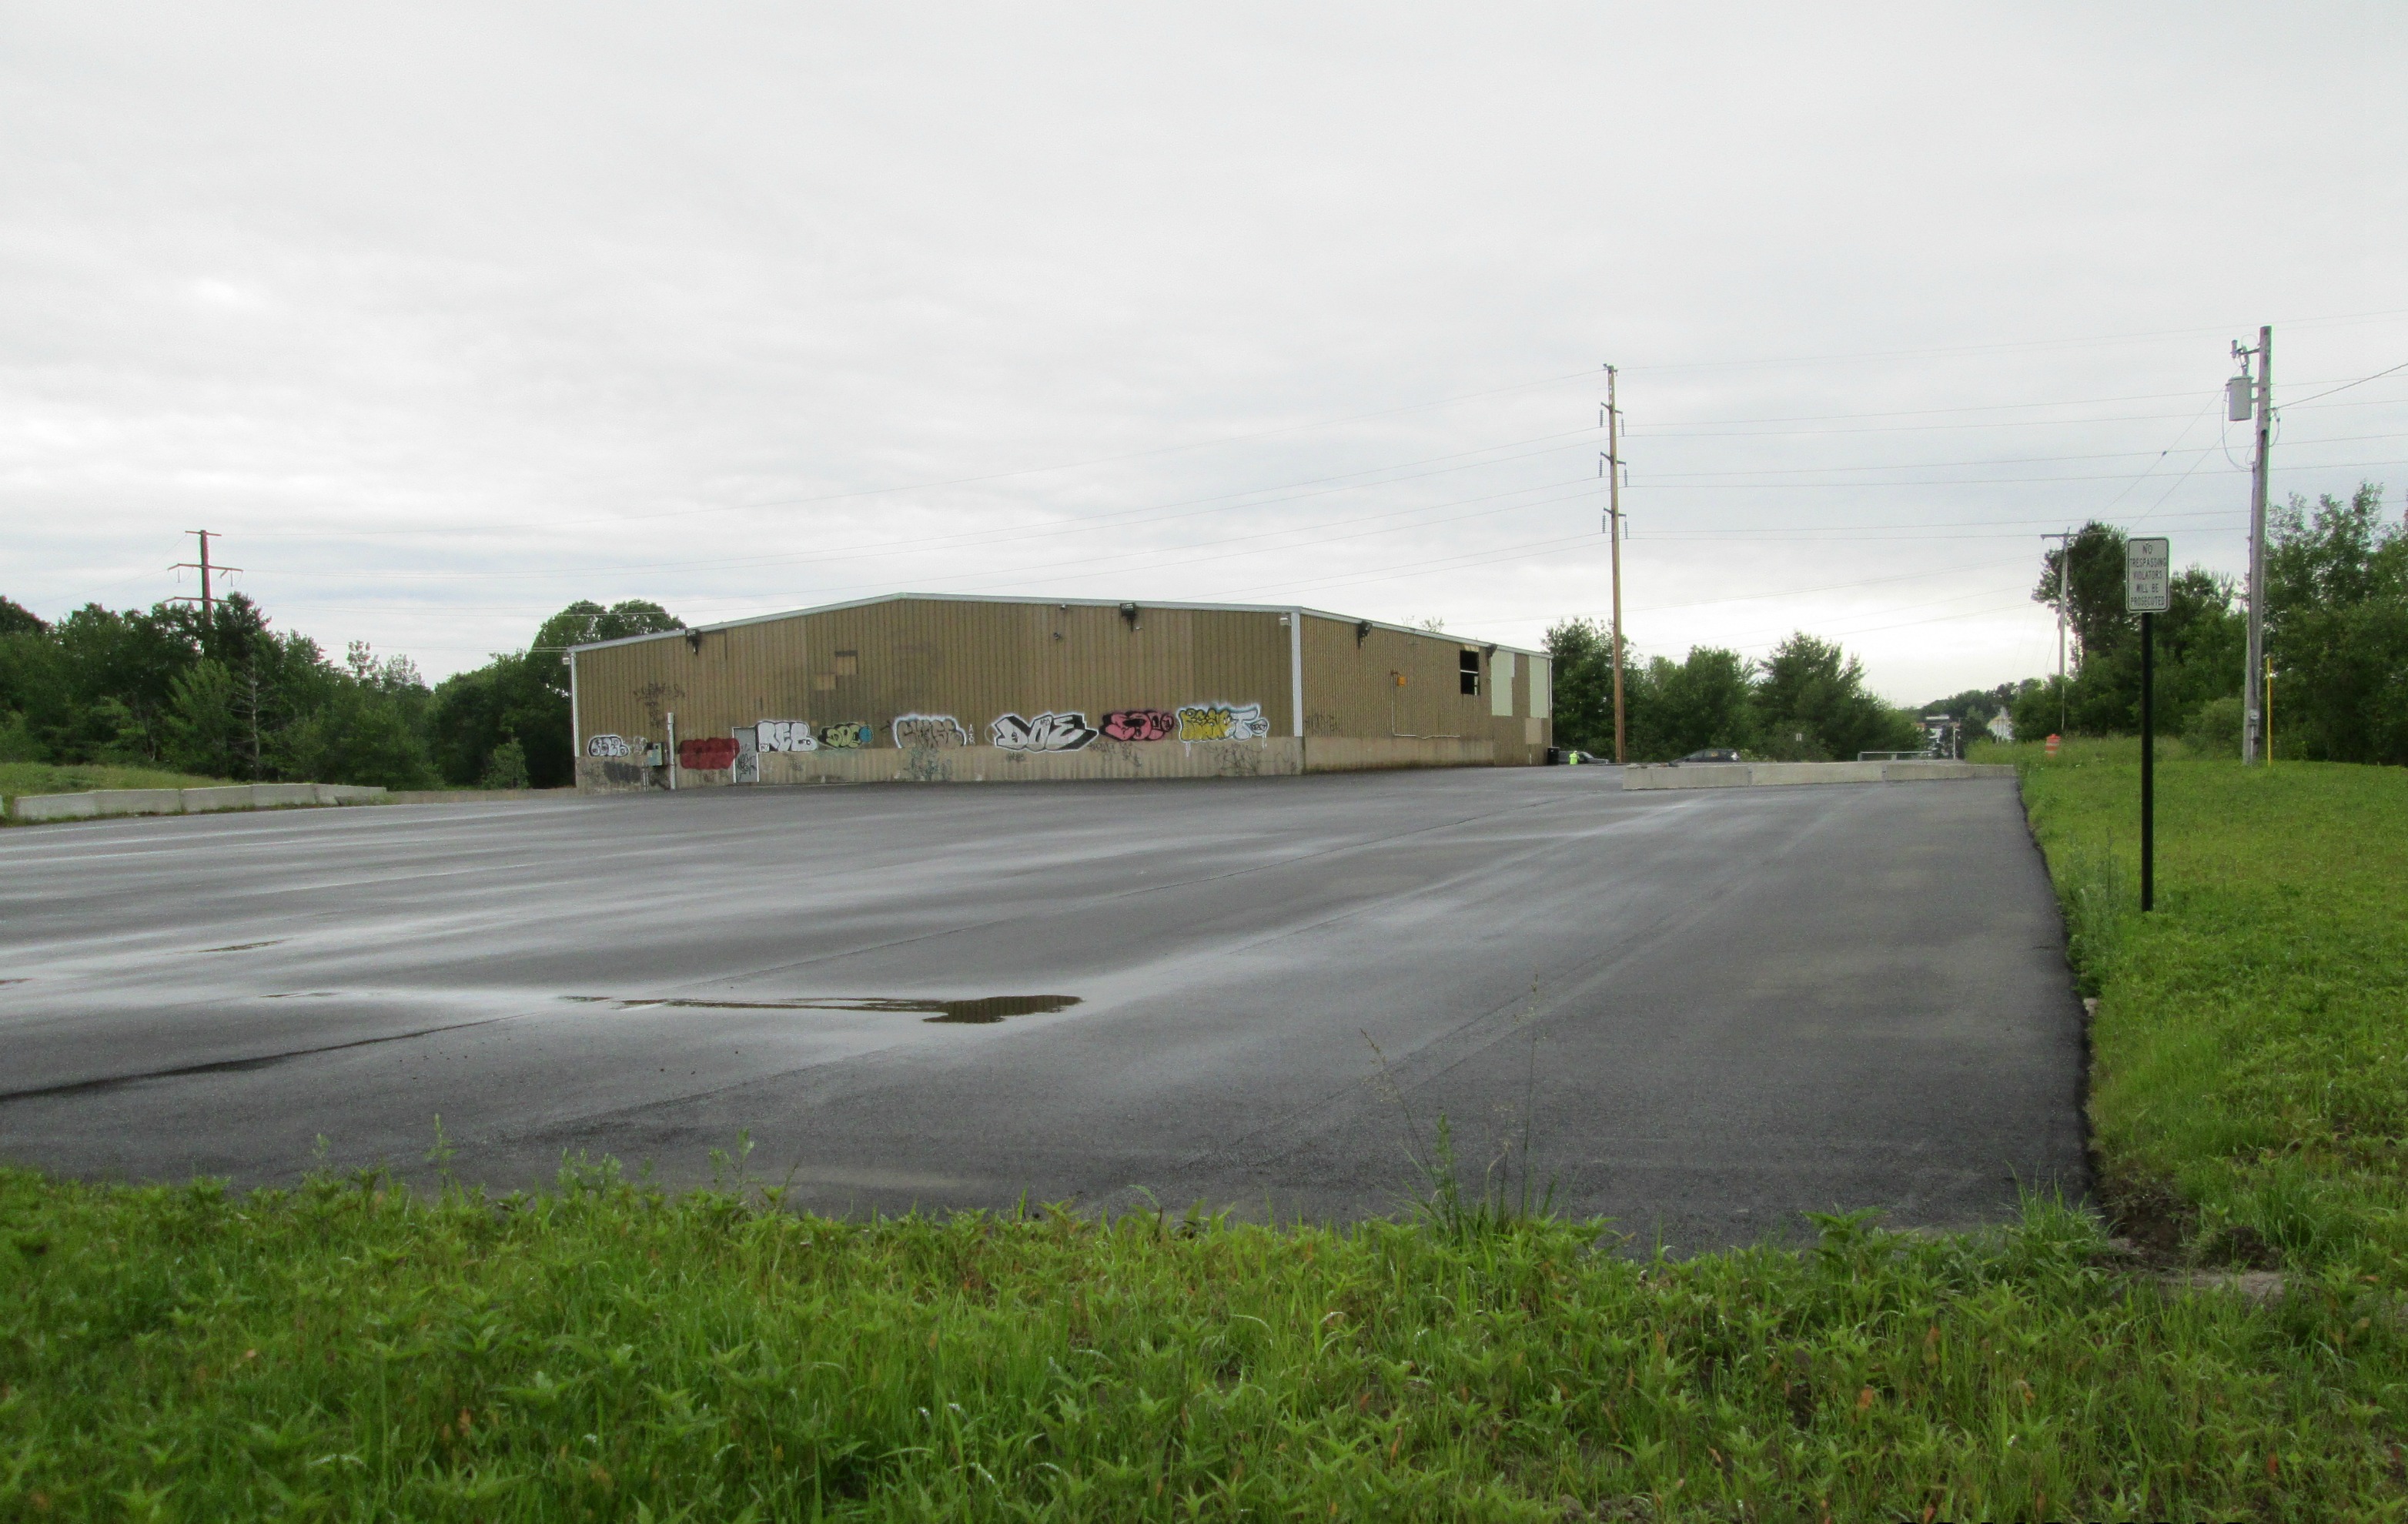 vacant industrial building and parking lot